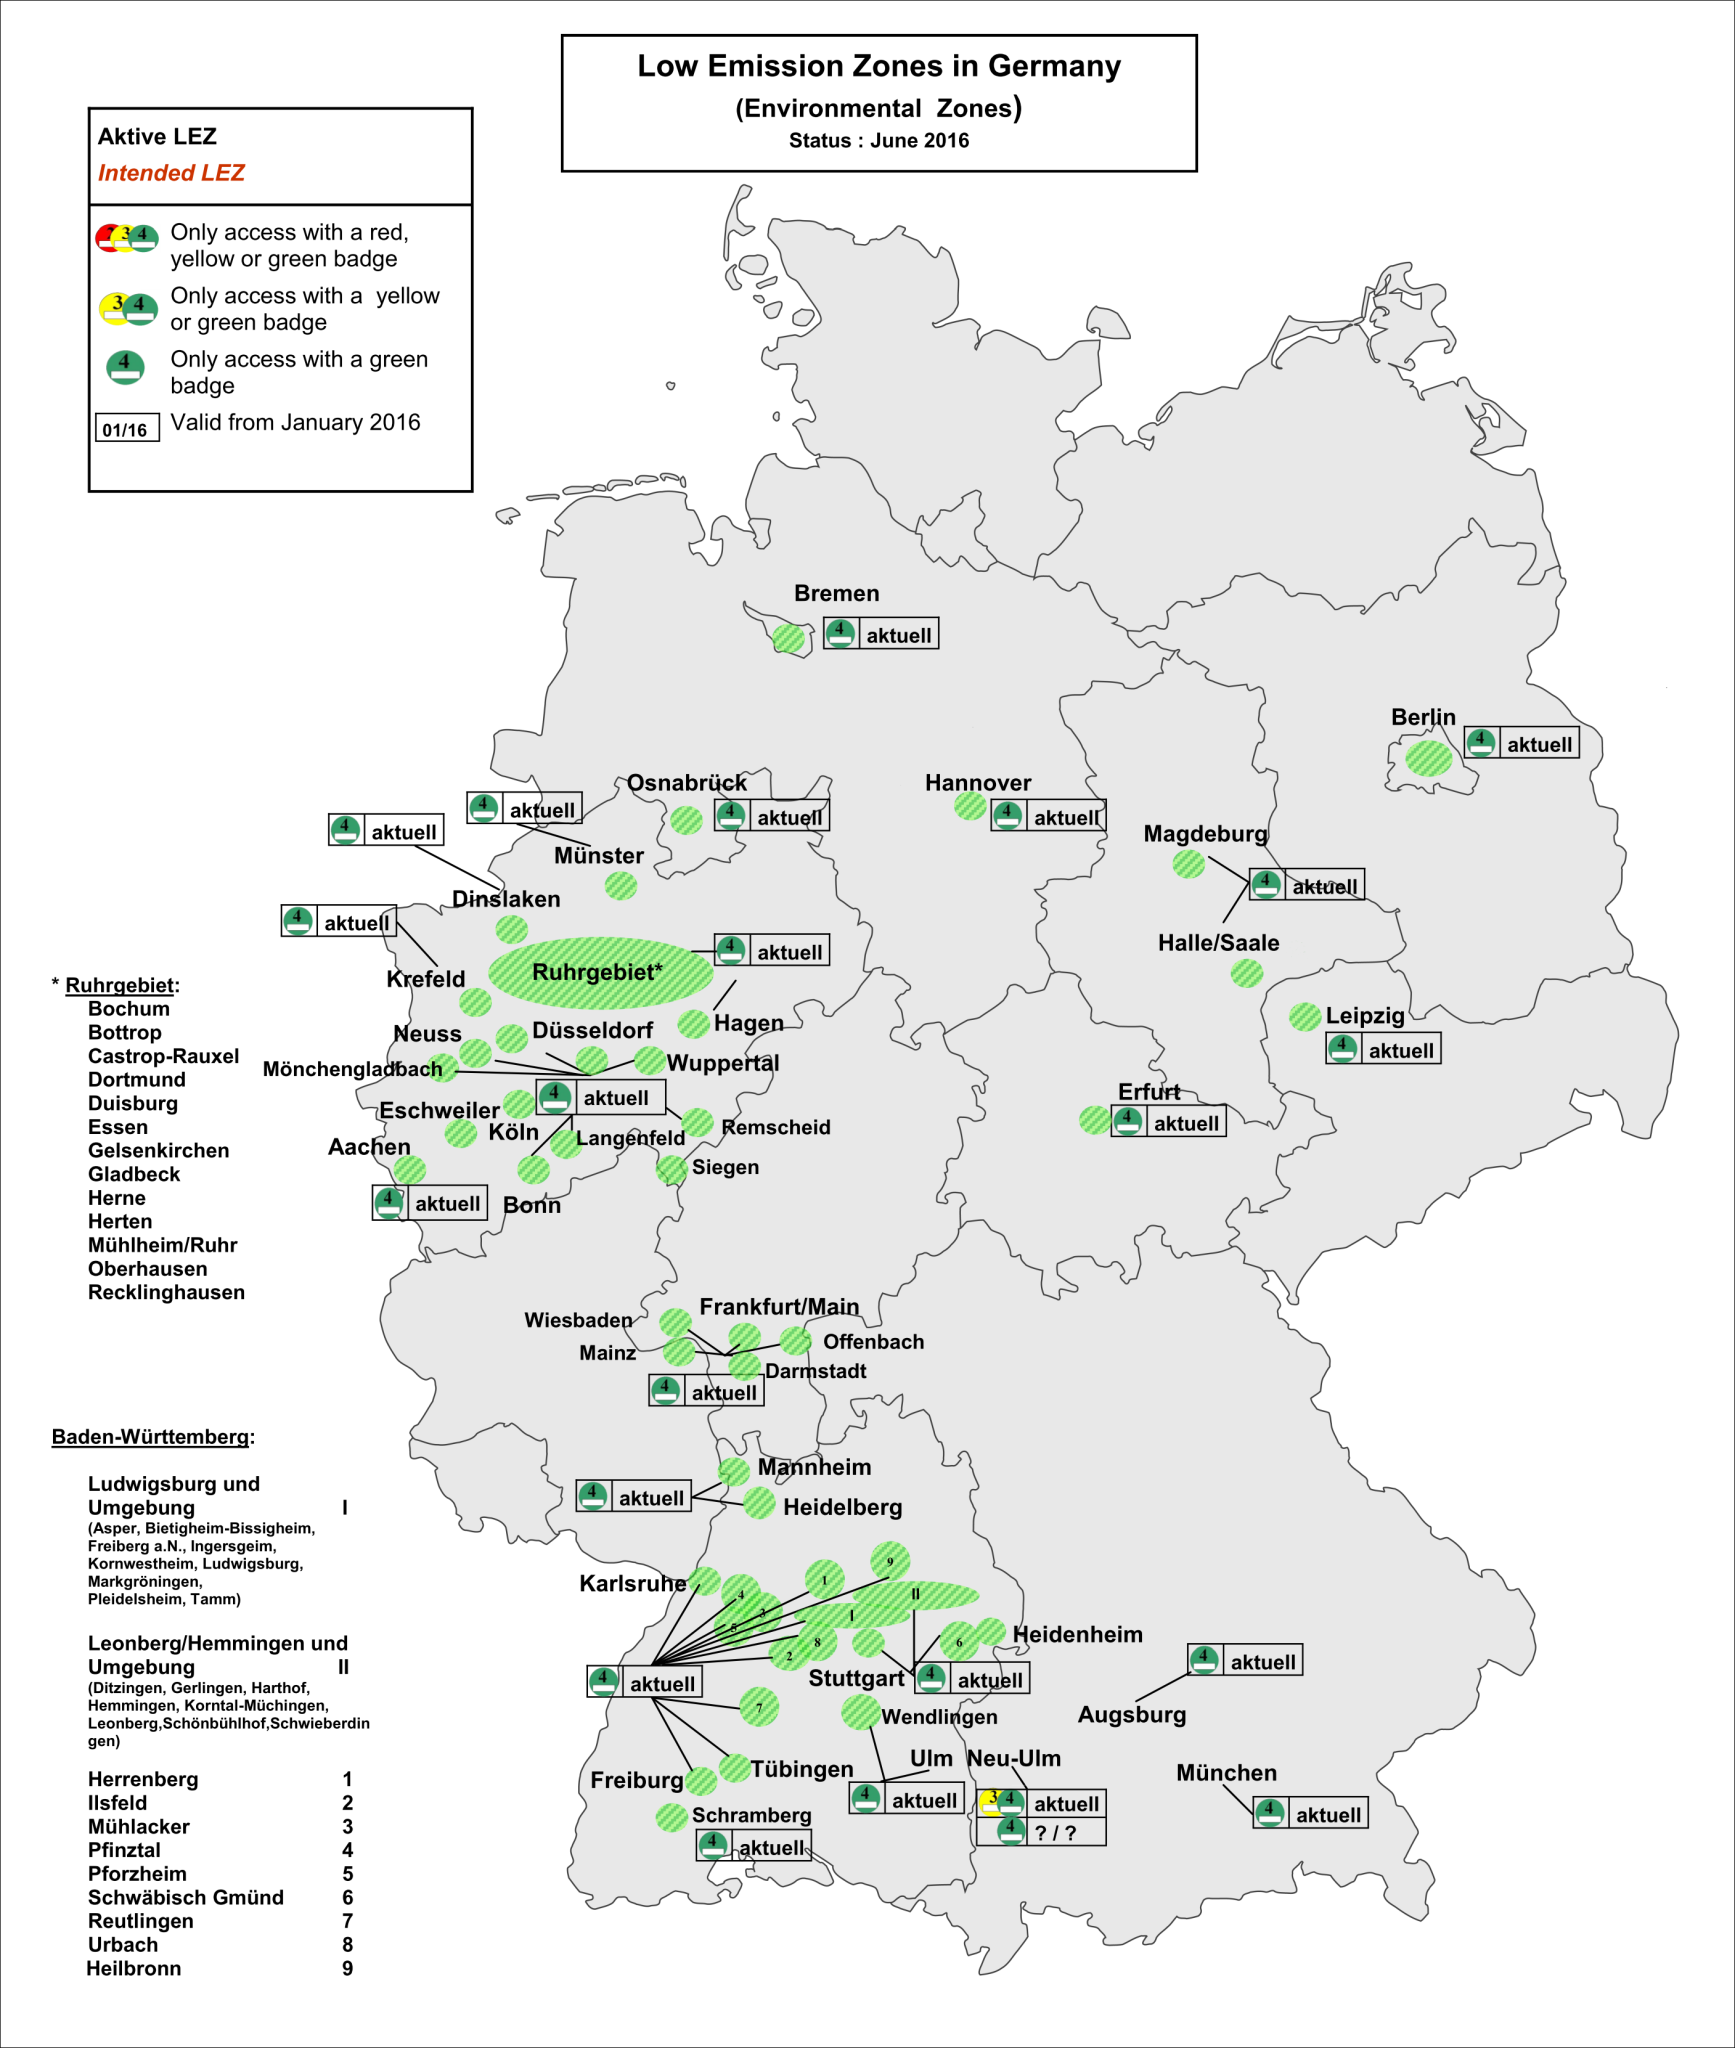 Low Emission Zones in Germany